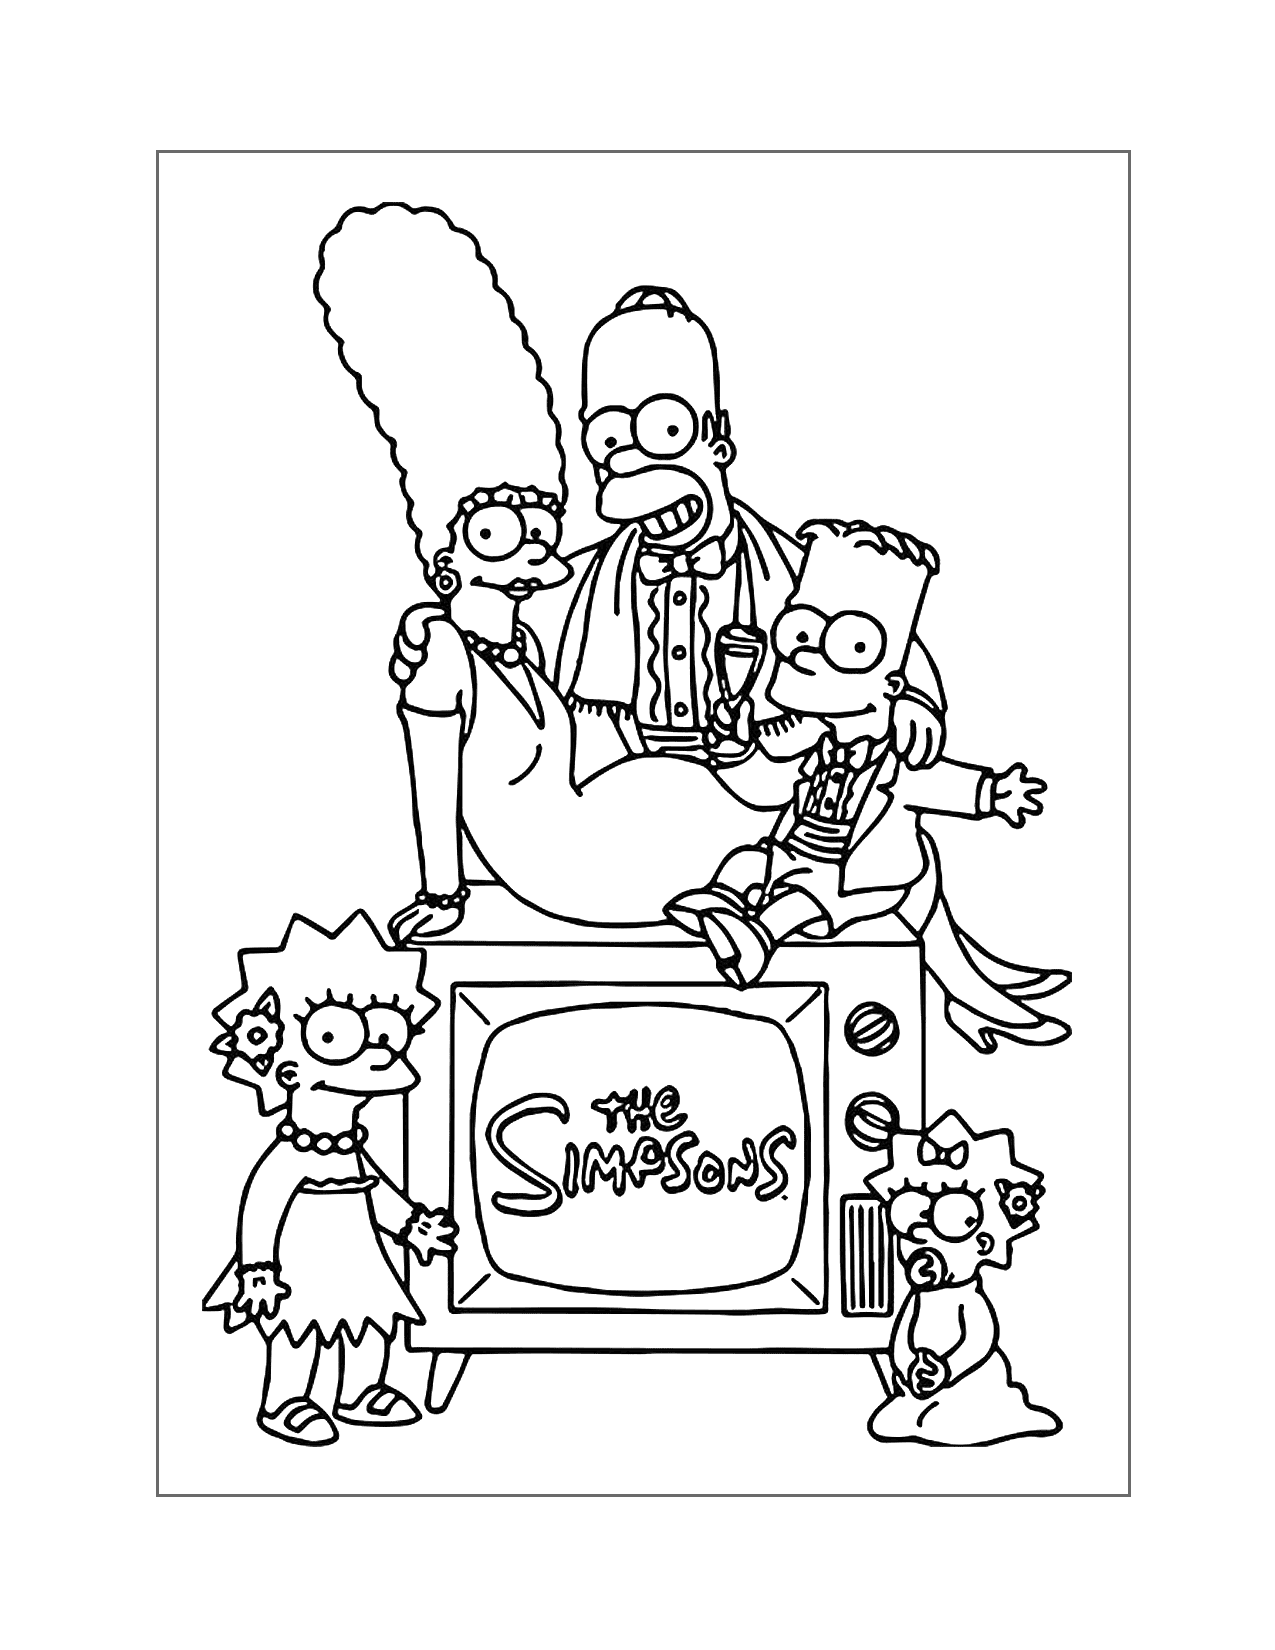 The Simpsons Show Coloring Page